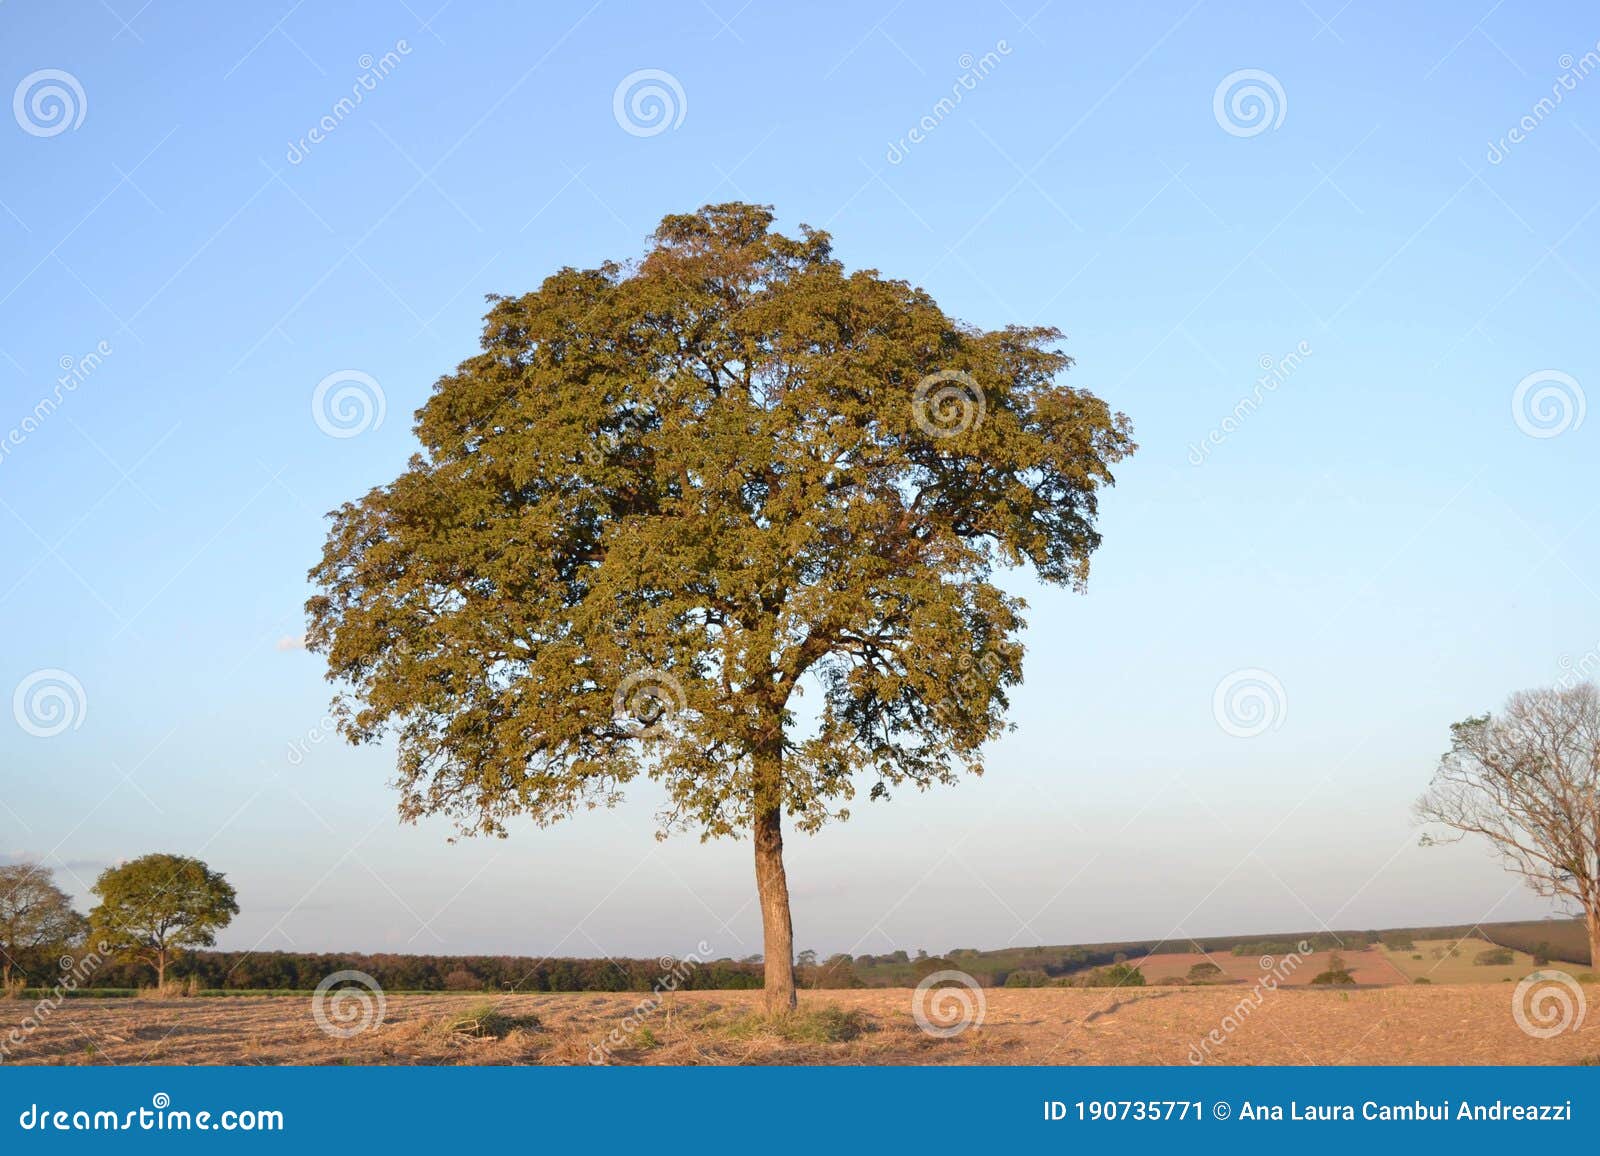 a undefined tree on the landscape